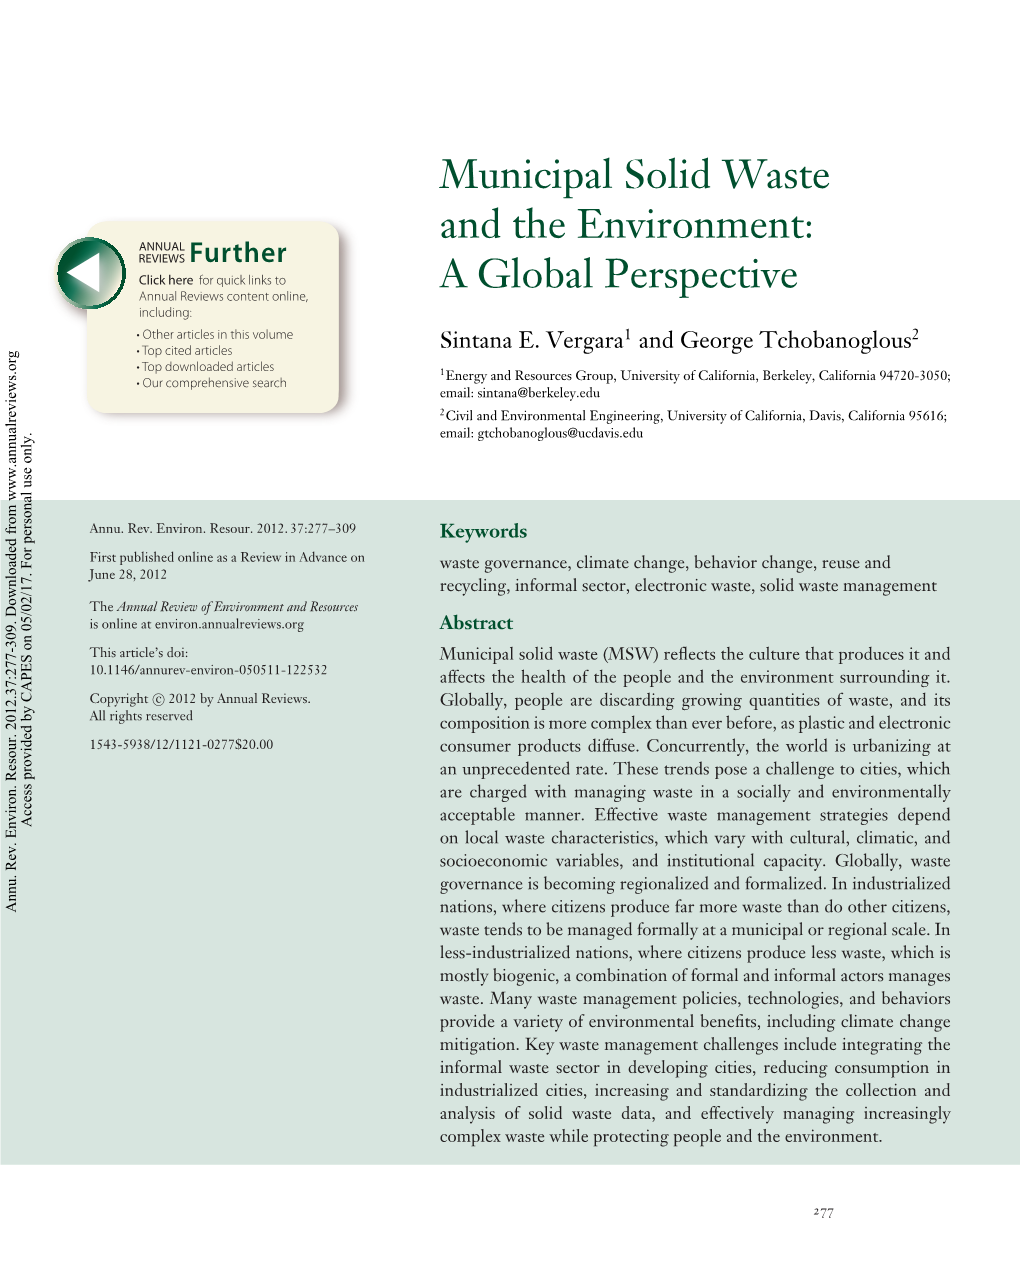 Municipal Solid Waste and the Environment: a Global Perspective